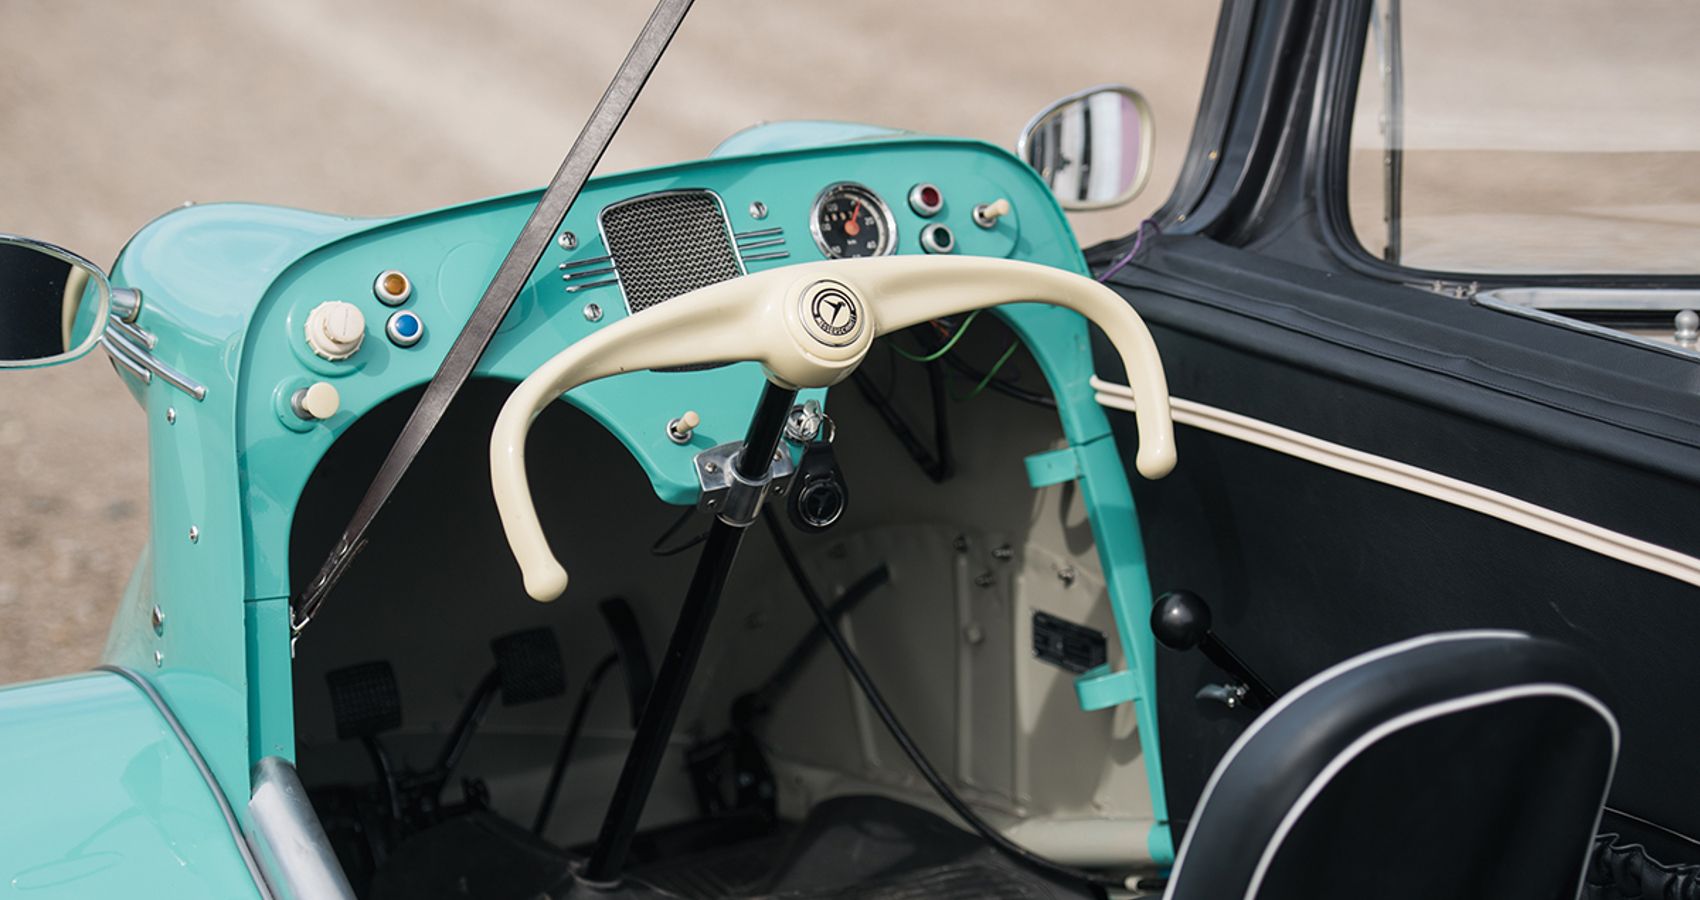 The Yoke On The Messerschmitt Was Very Different To The Steering Wheel